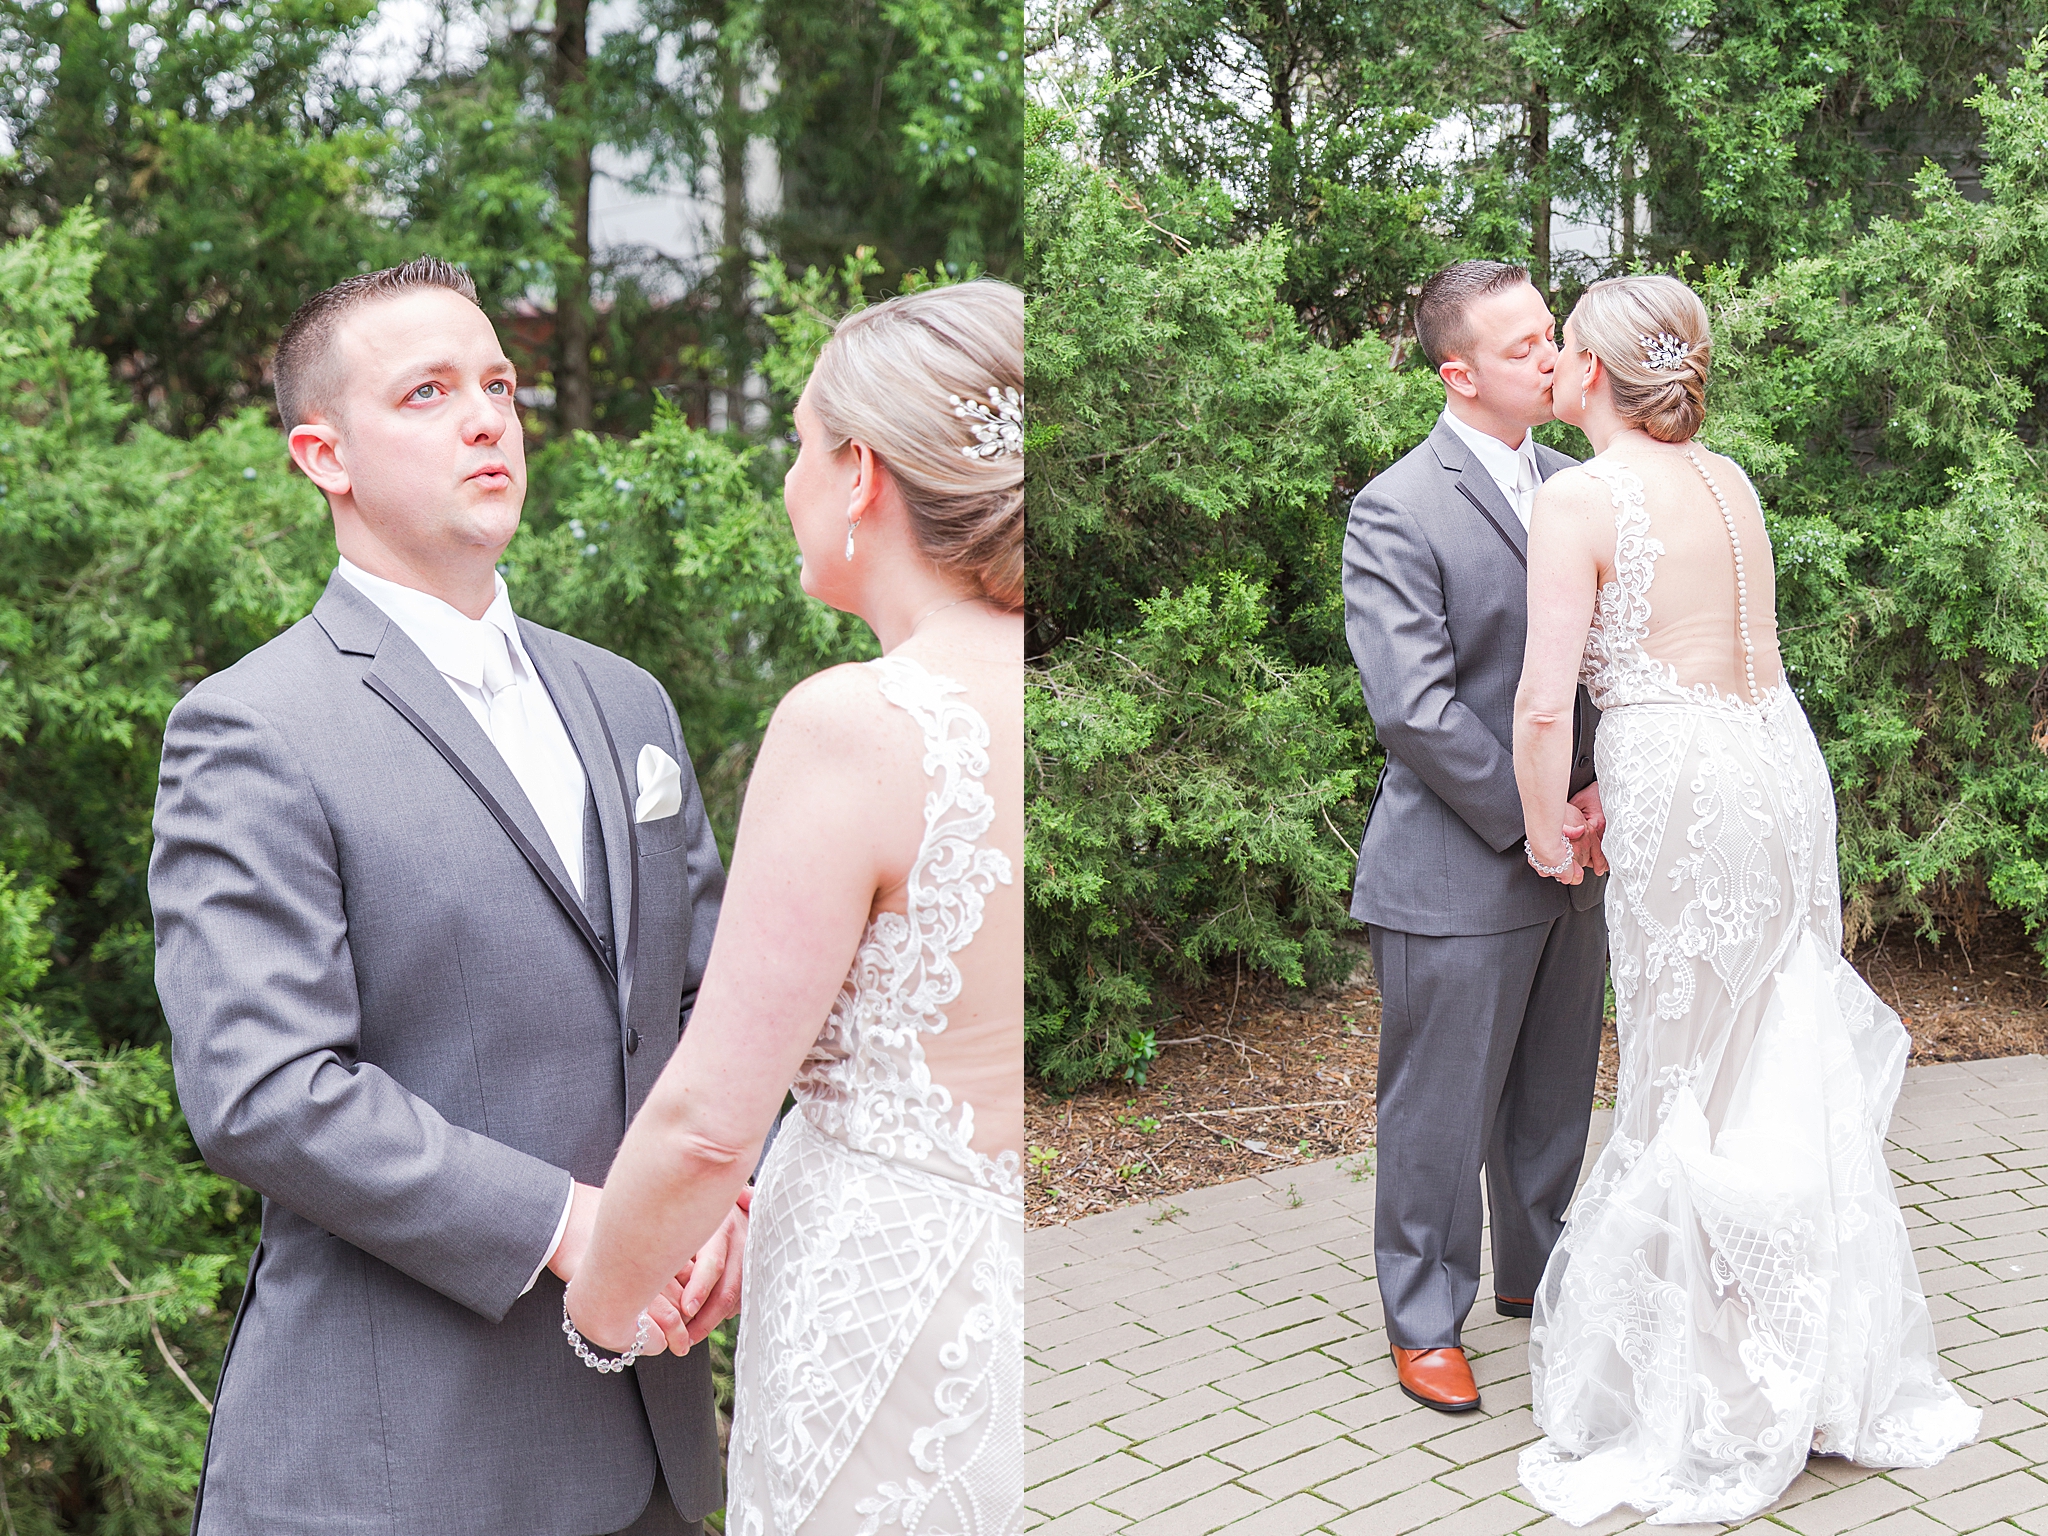 modern-romantic-wedding-photography-at-webers-in-ann-arbor-michigan-by-courtney-carolyn-photography_0024.jpg